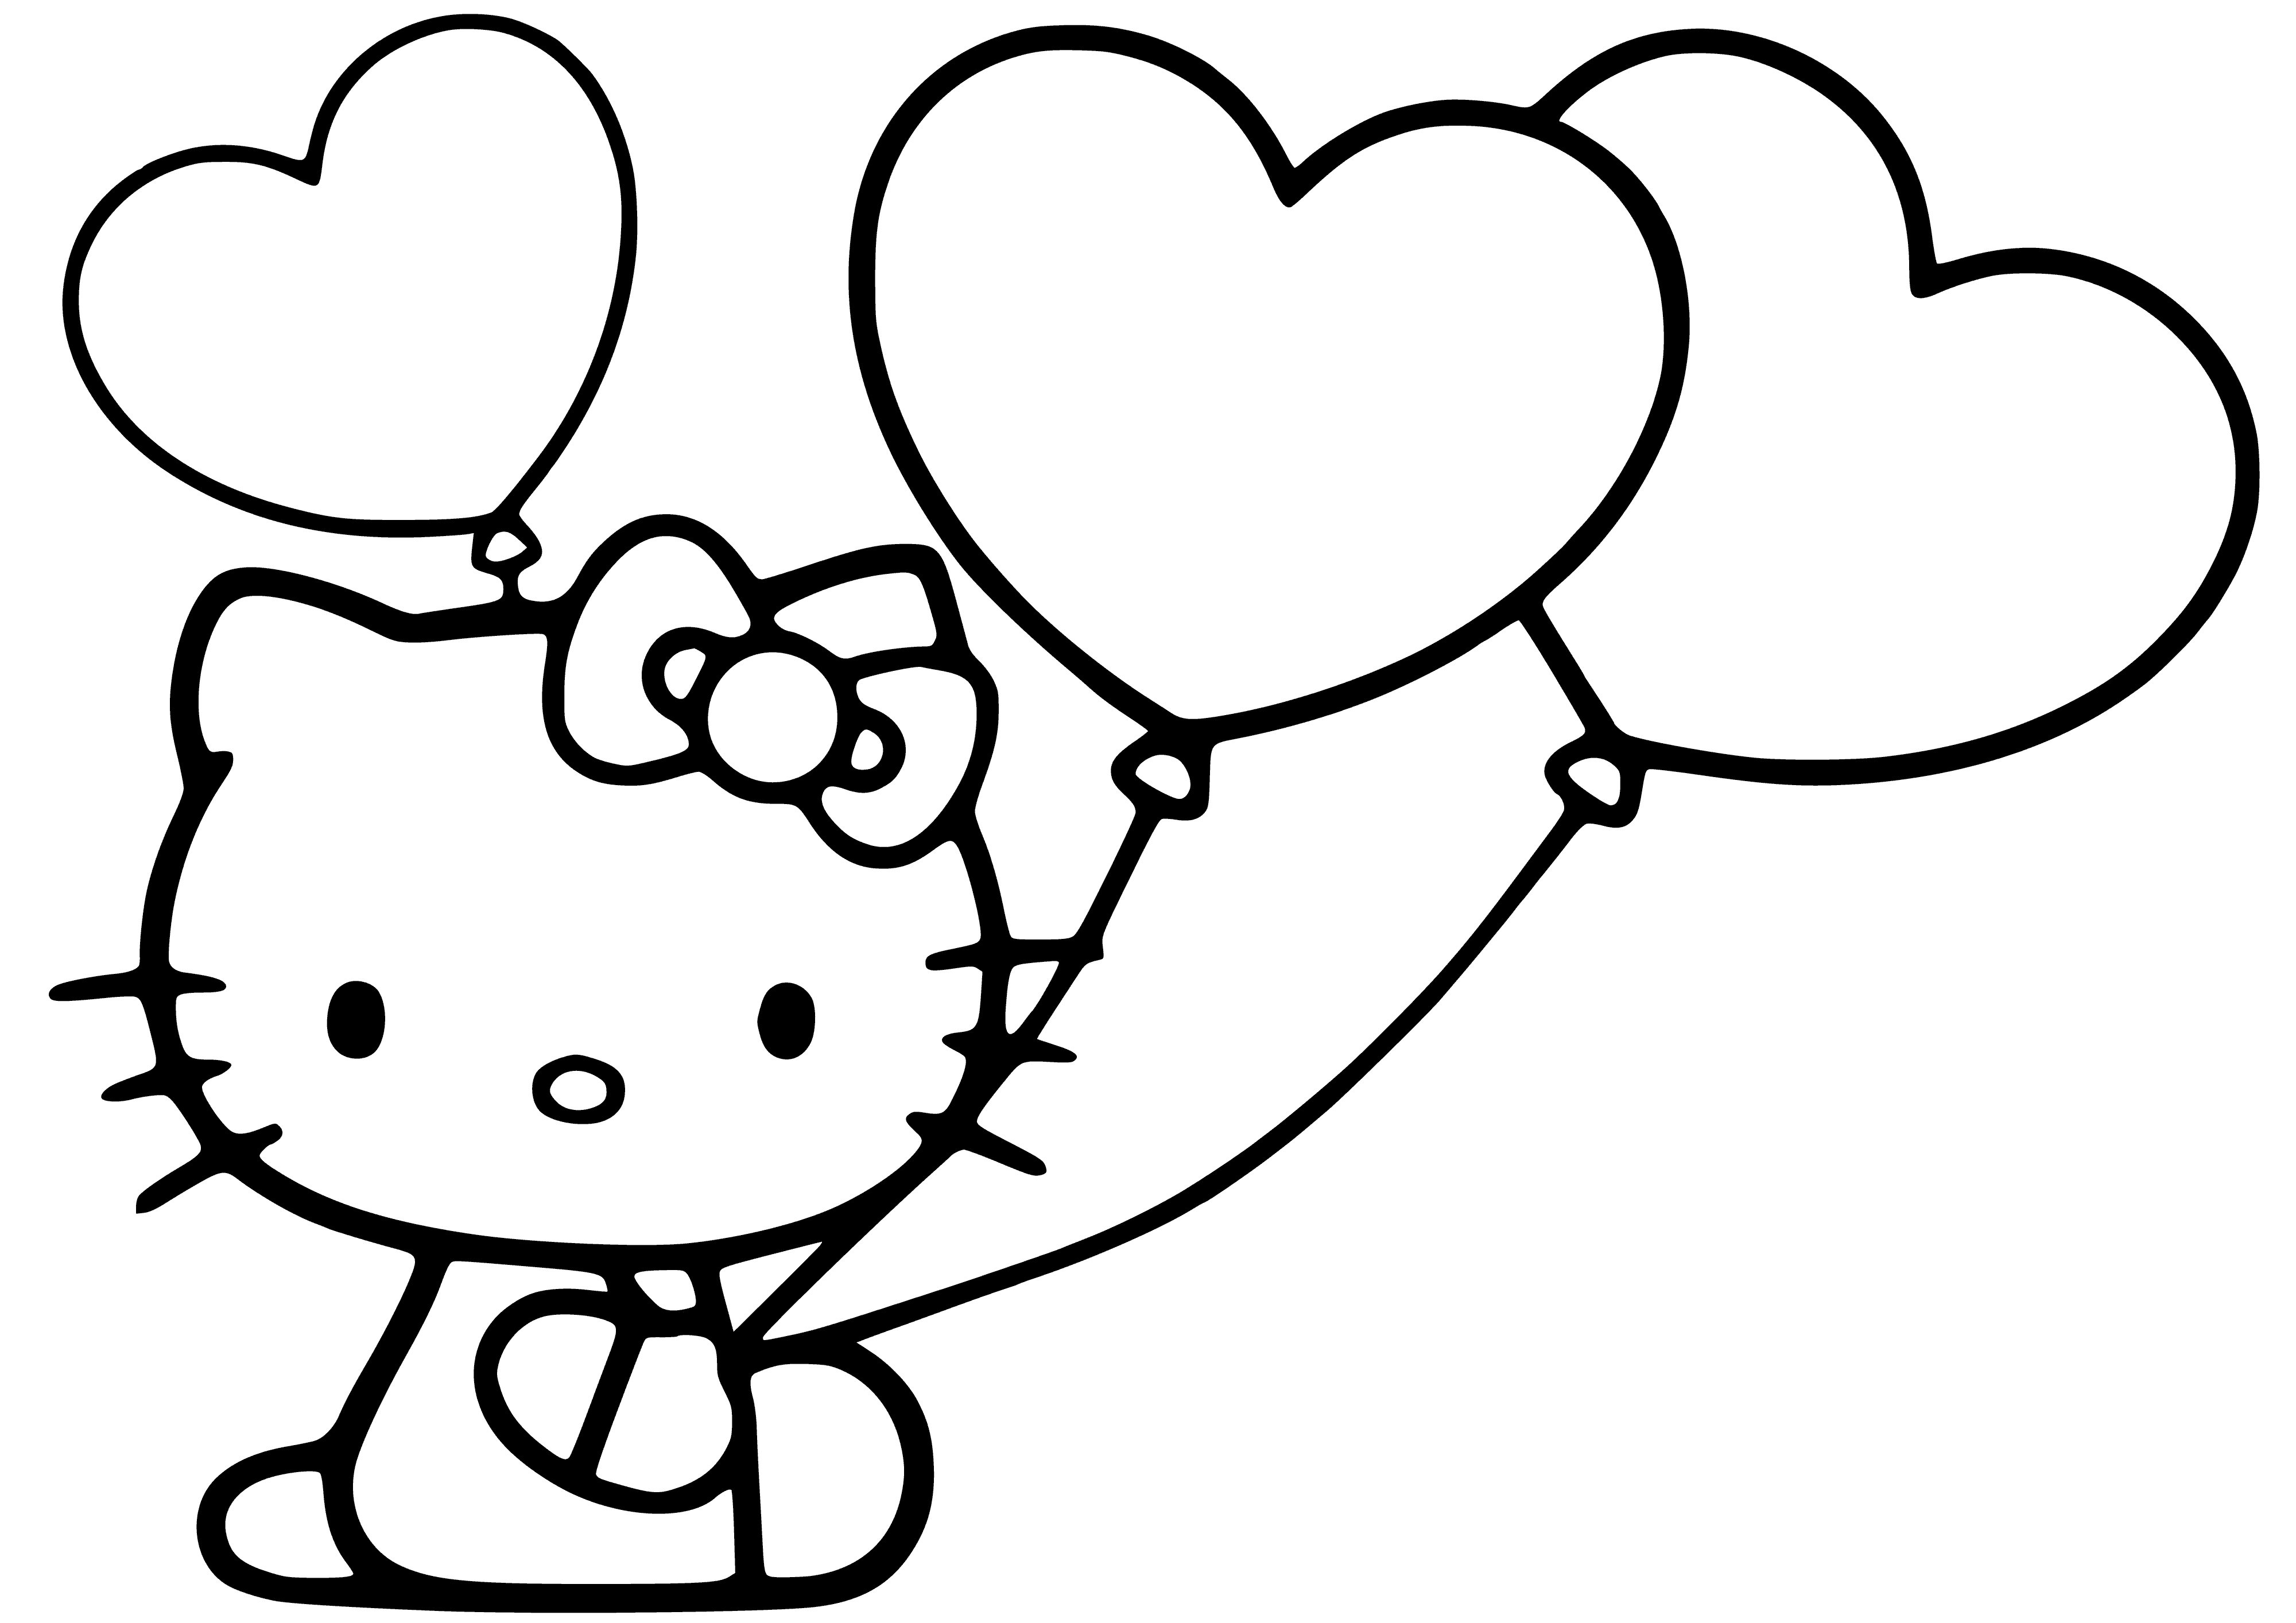 coloring page: Hello Kitty is holding a heart in a pink background. #HelloKitty #ColoringPages